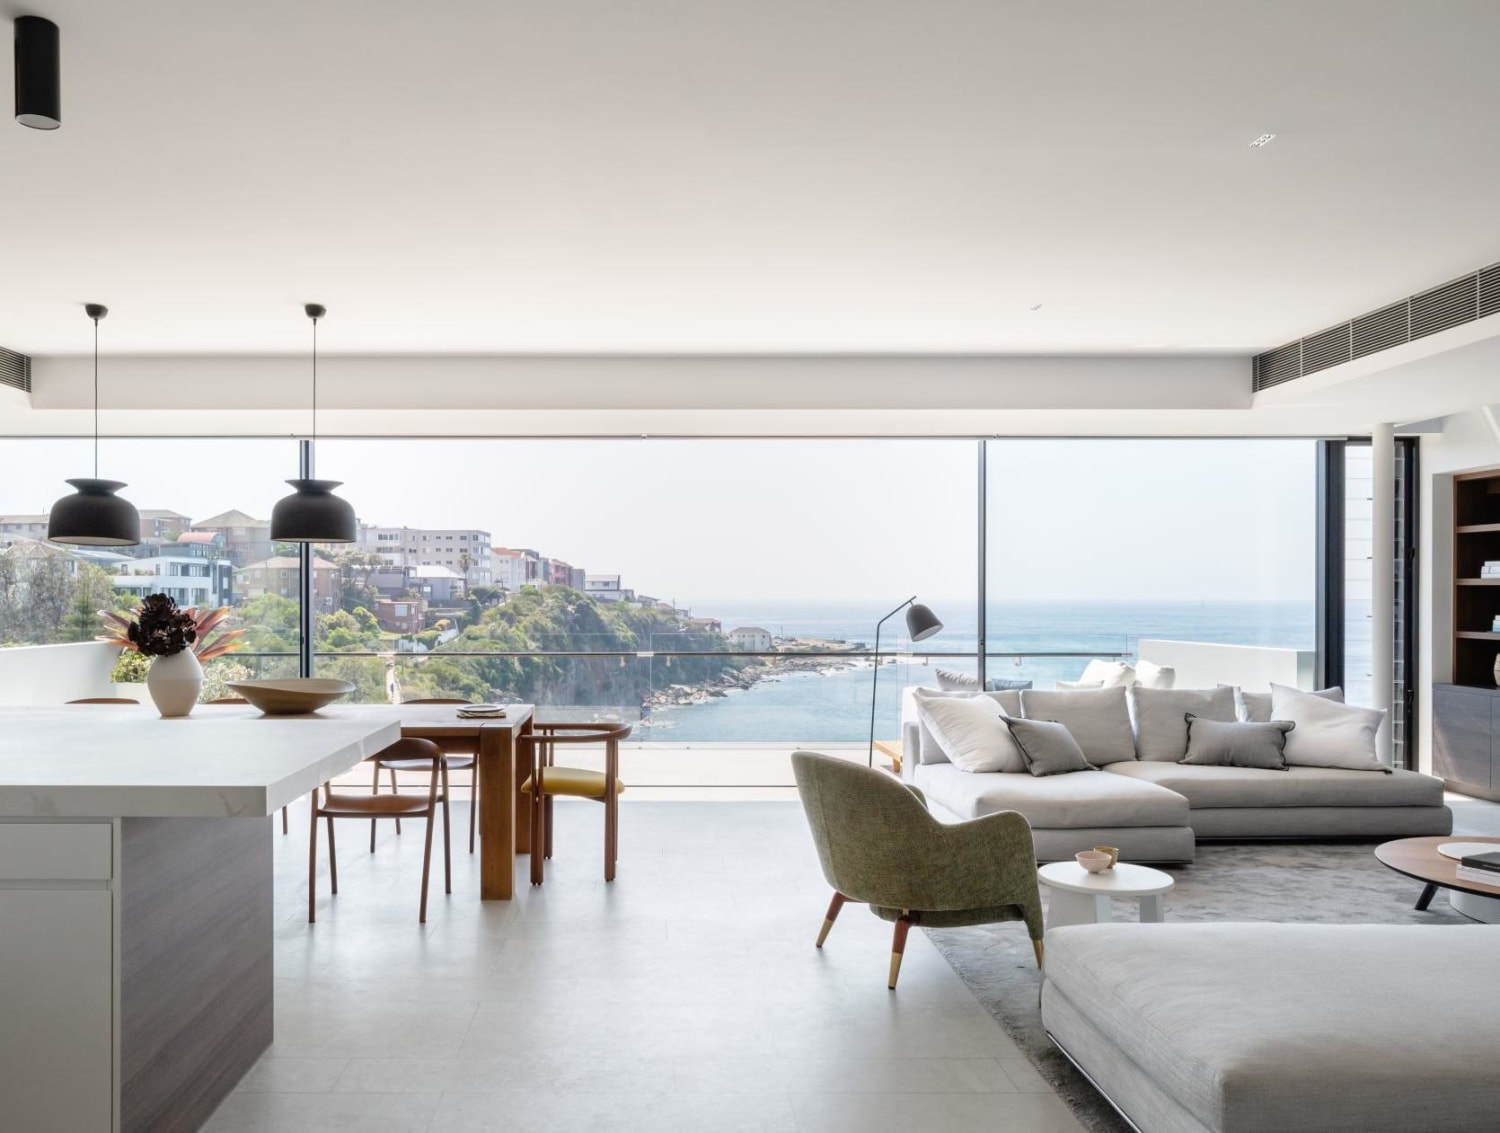 Open space living and dining in an ocean-side home with sweeping views of Gordons Bay, Sydney, Australia by Milieu Creative